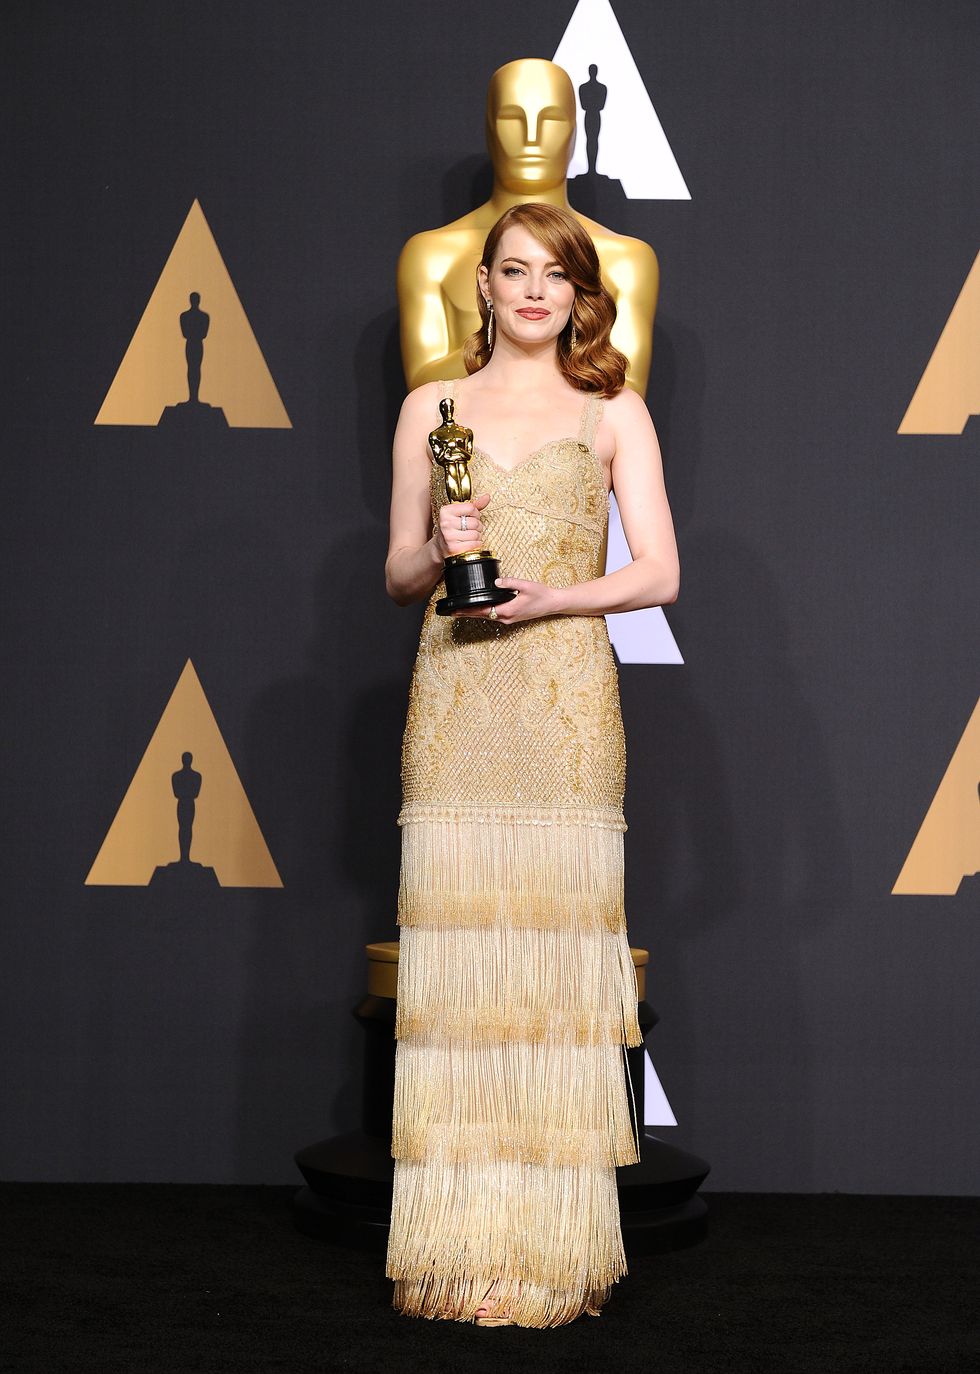 hollywood, ca february 26 actress emma stone poses in the press room at the 89th annual academy awards at hollywood highland center on february 26, 2017 in hollywood, california photo by jason laverisfilmmagic